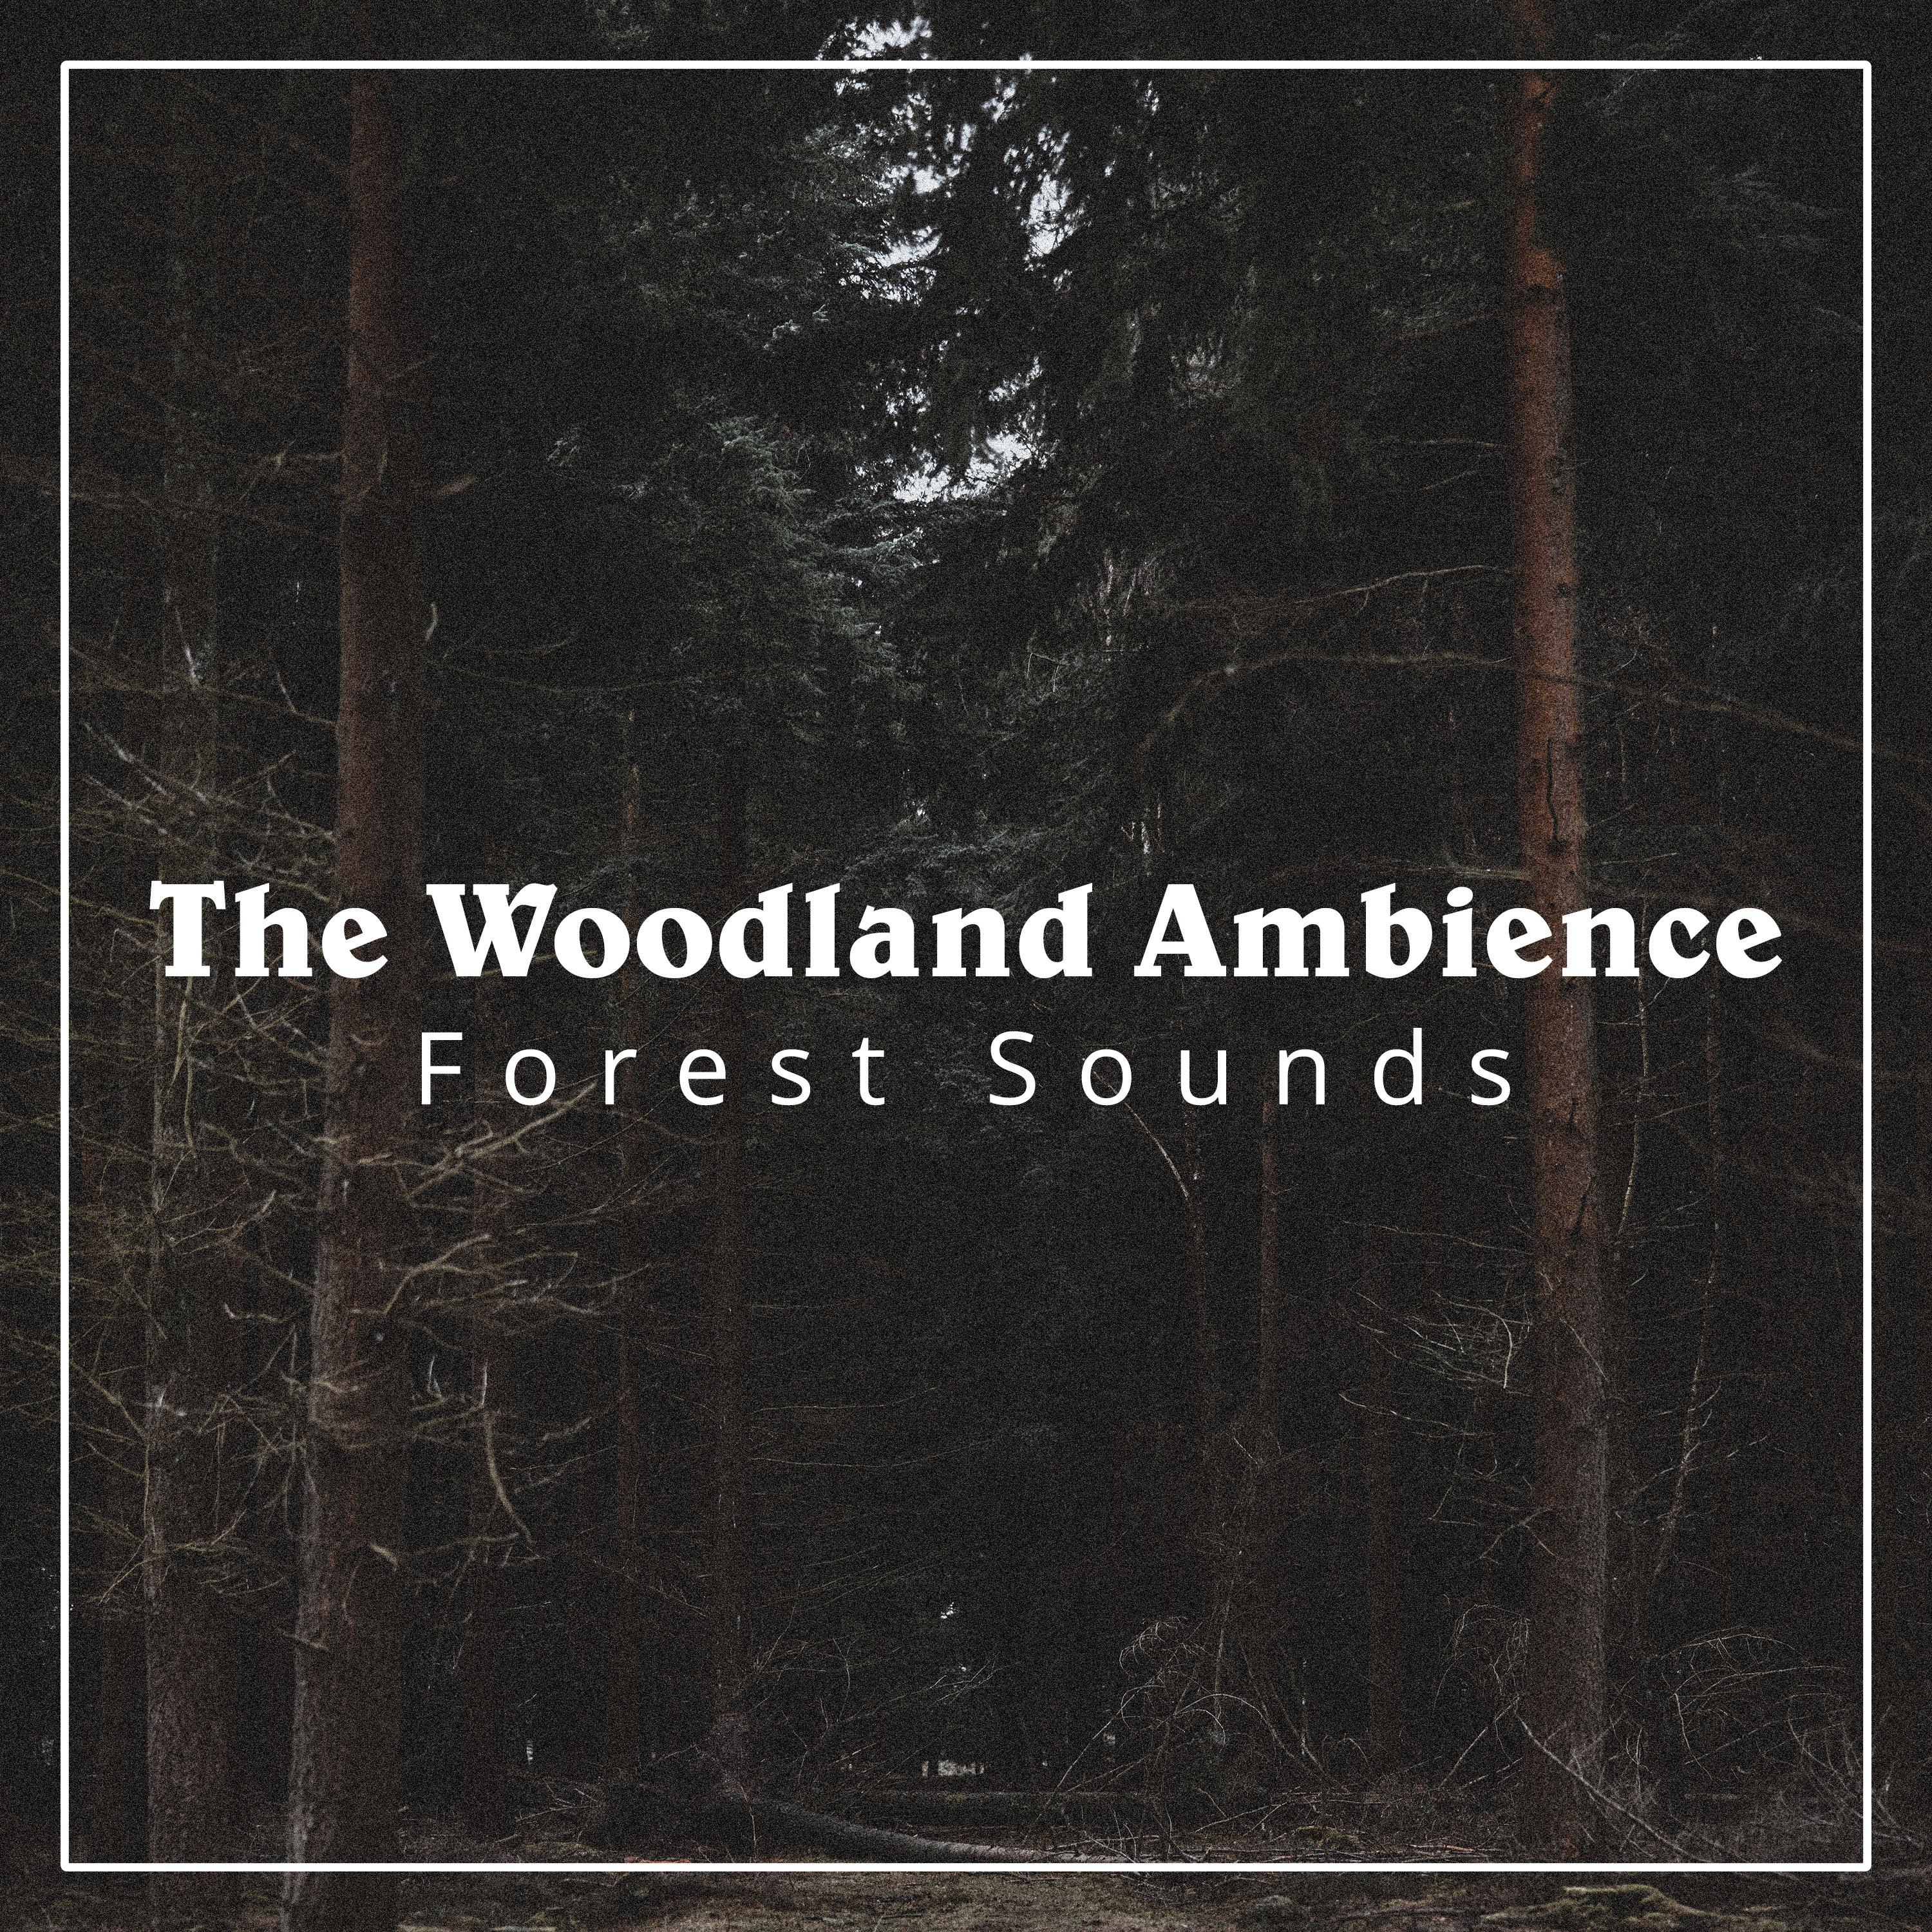 The Woodland Ambience